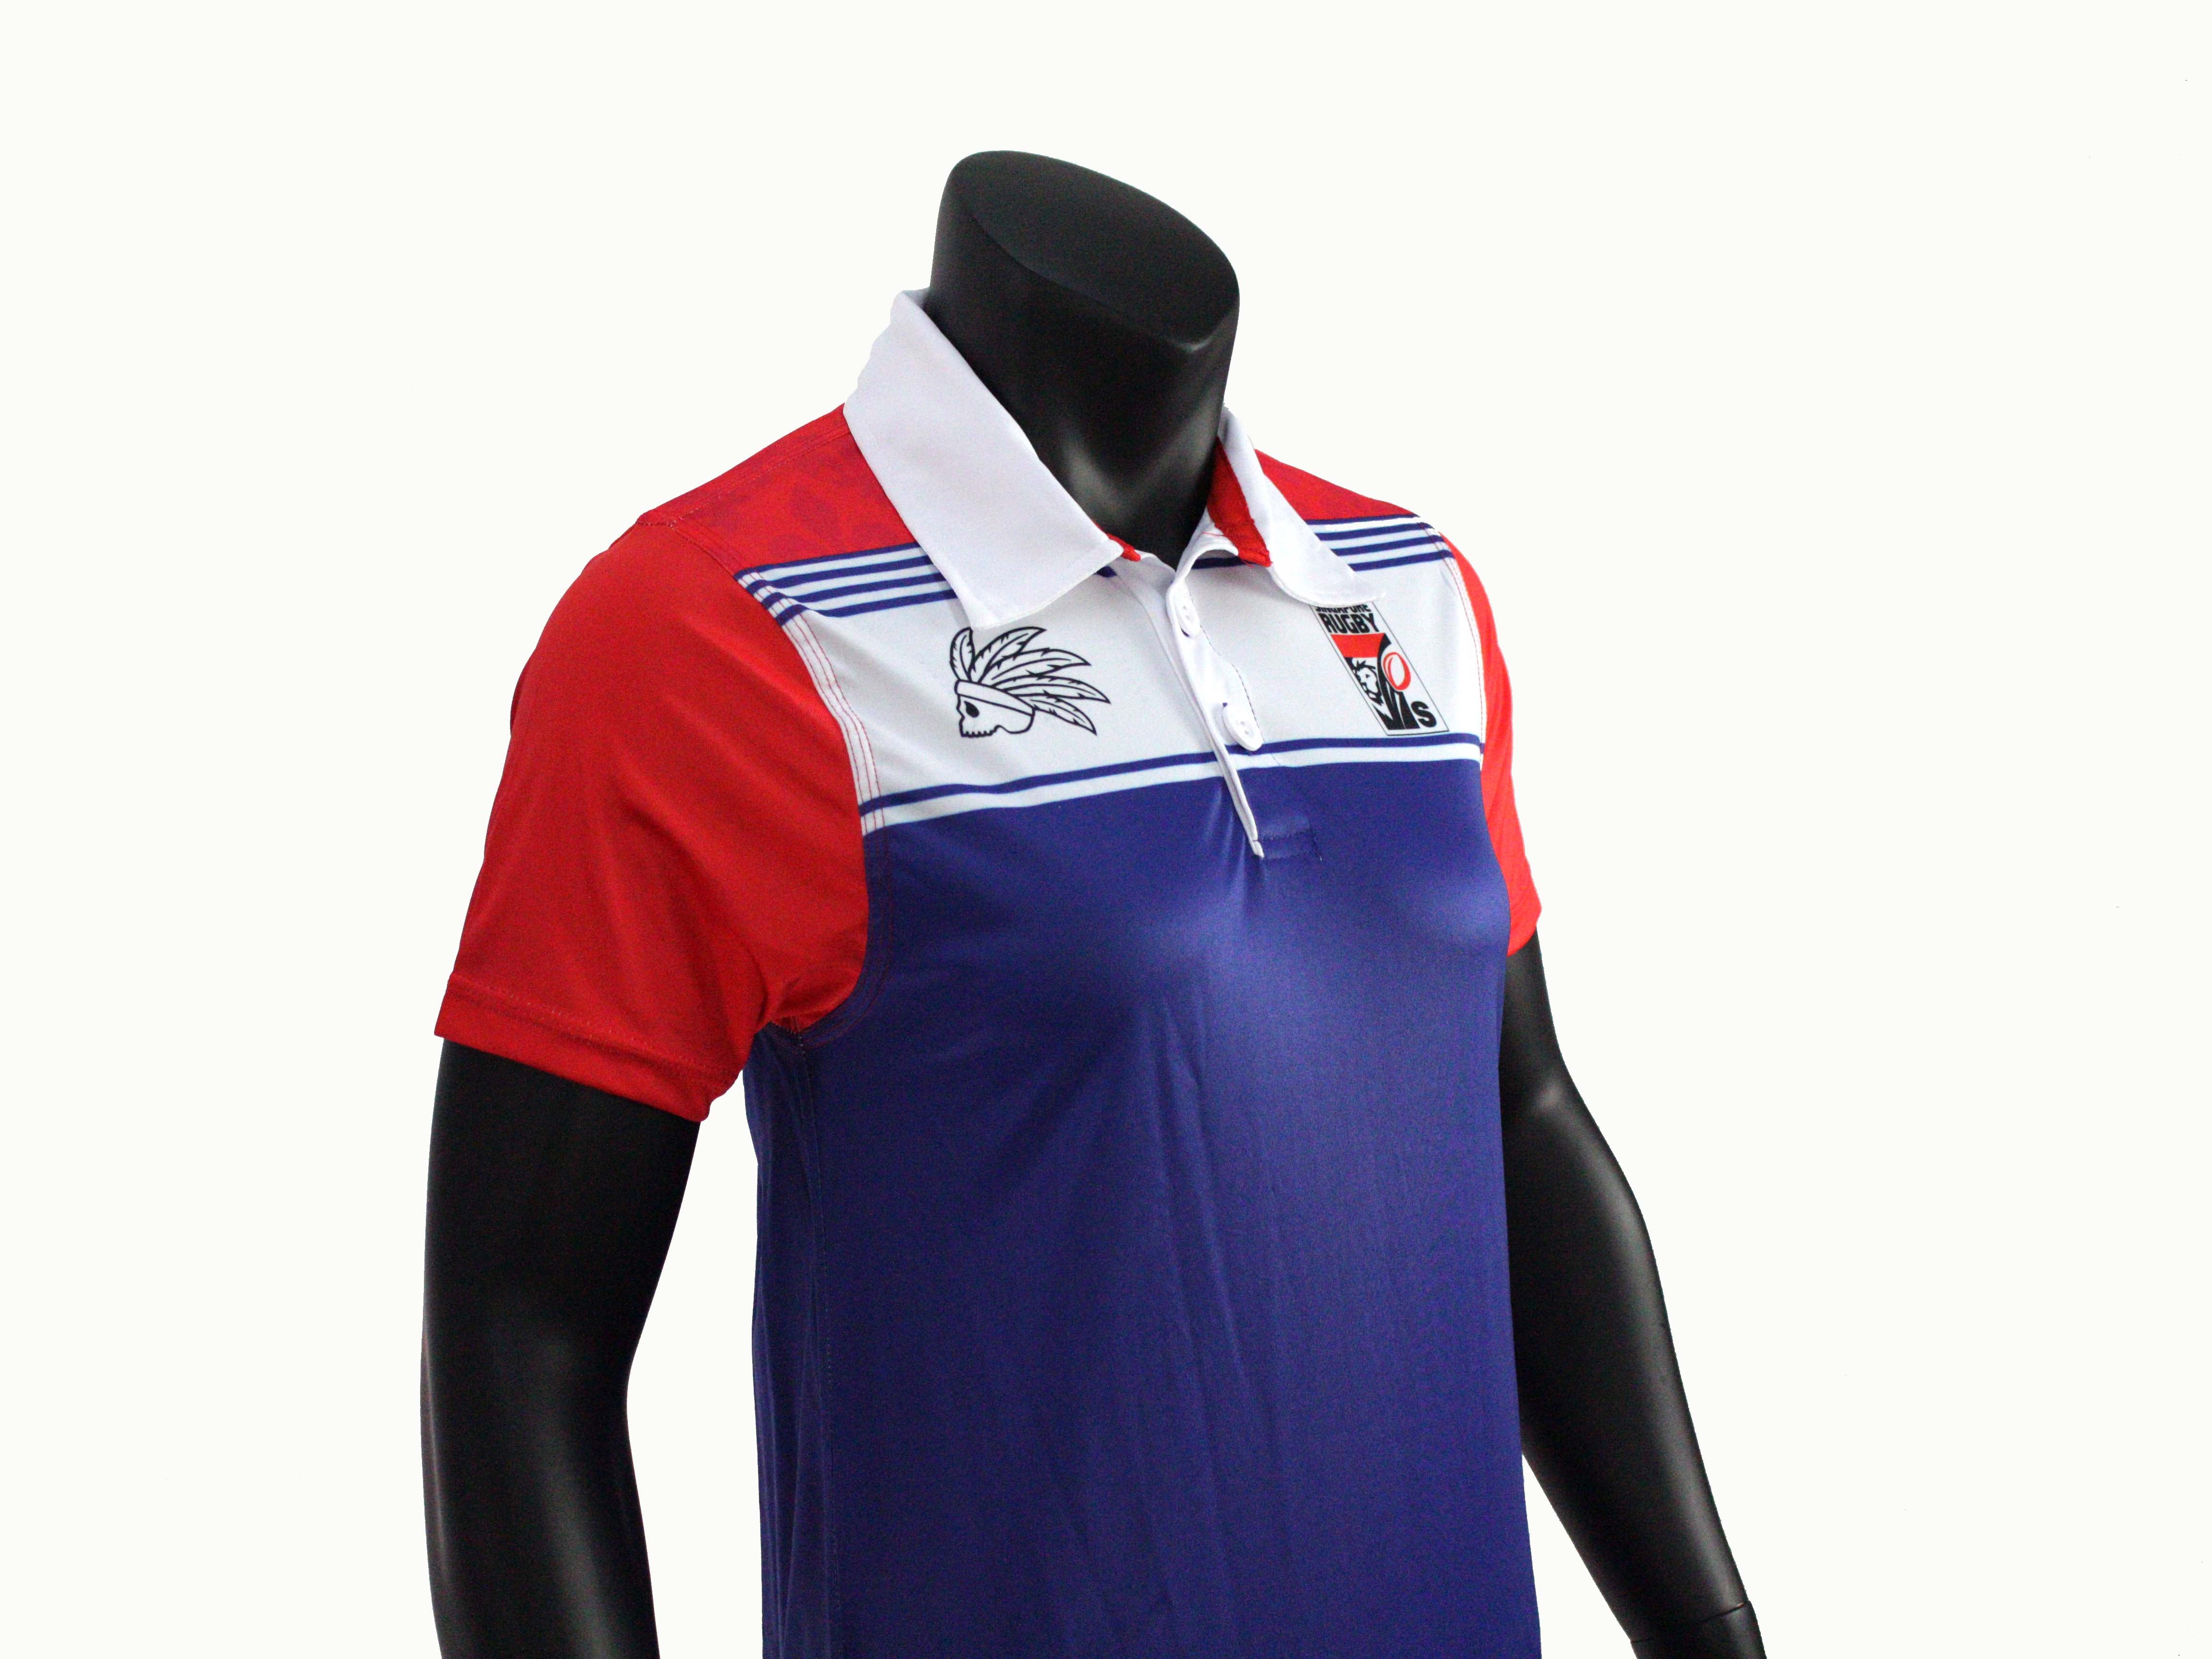 FRANCE RUGBY POLO